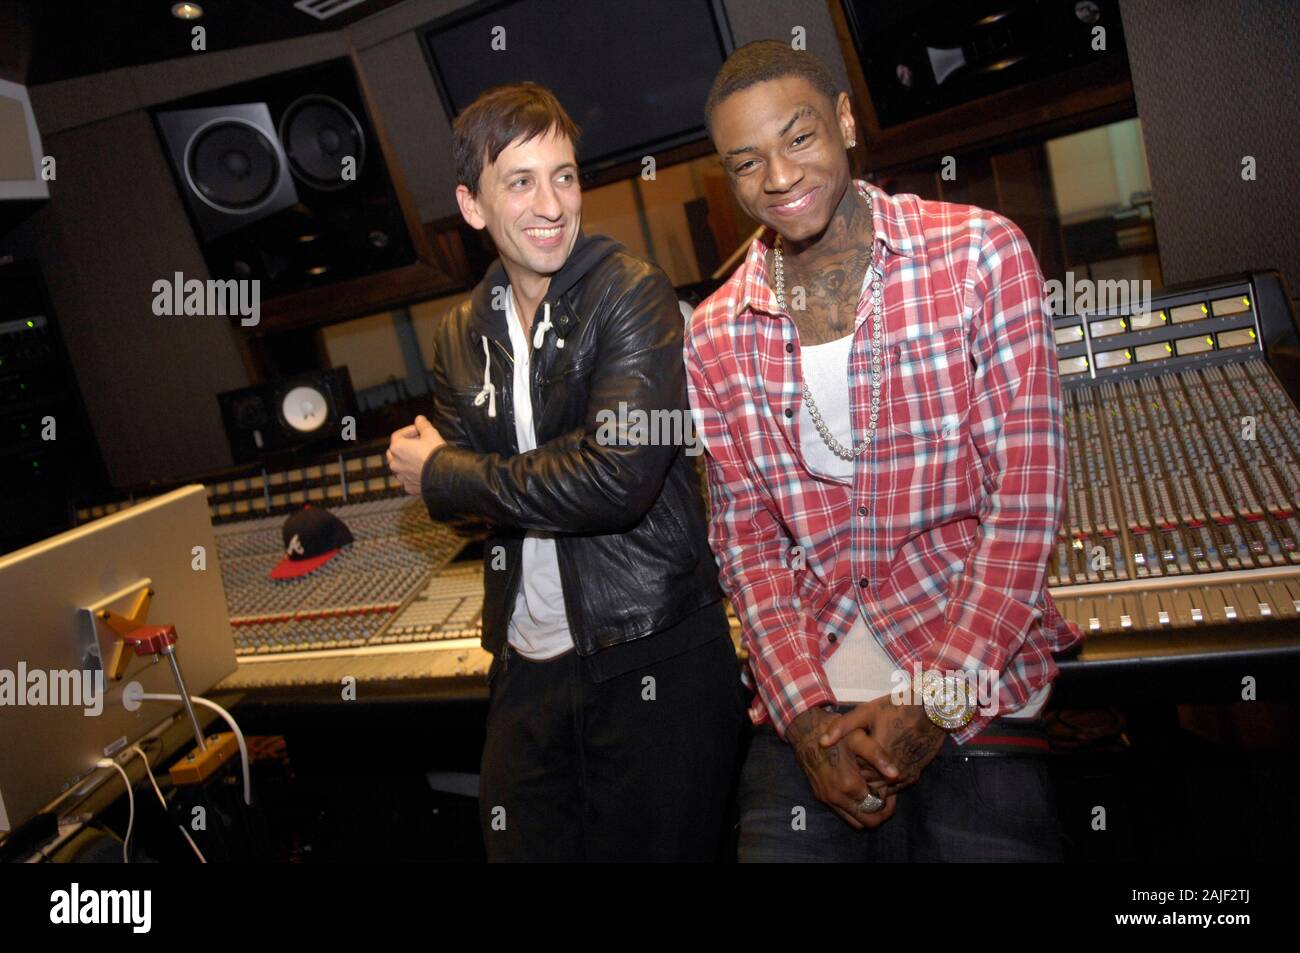 (L-R) Clinton Sparks and Rapper Deandre Way aka Soulja Boy at a recording studio on February 5, 2010 in Los Angeles, California. Stock Photo